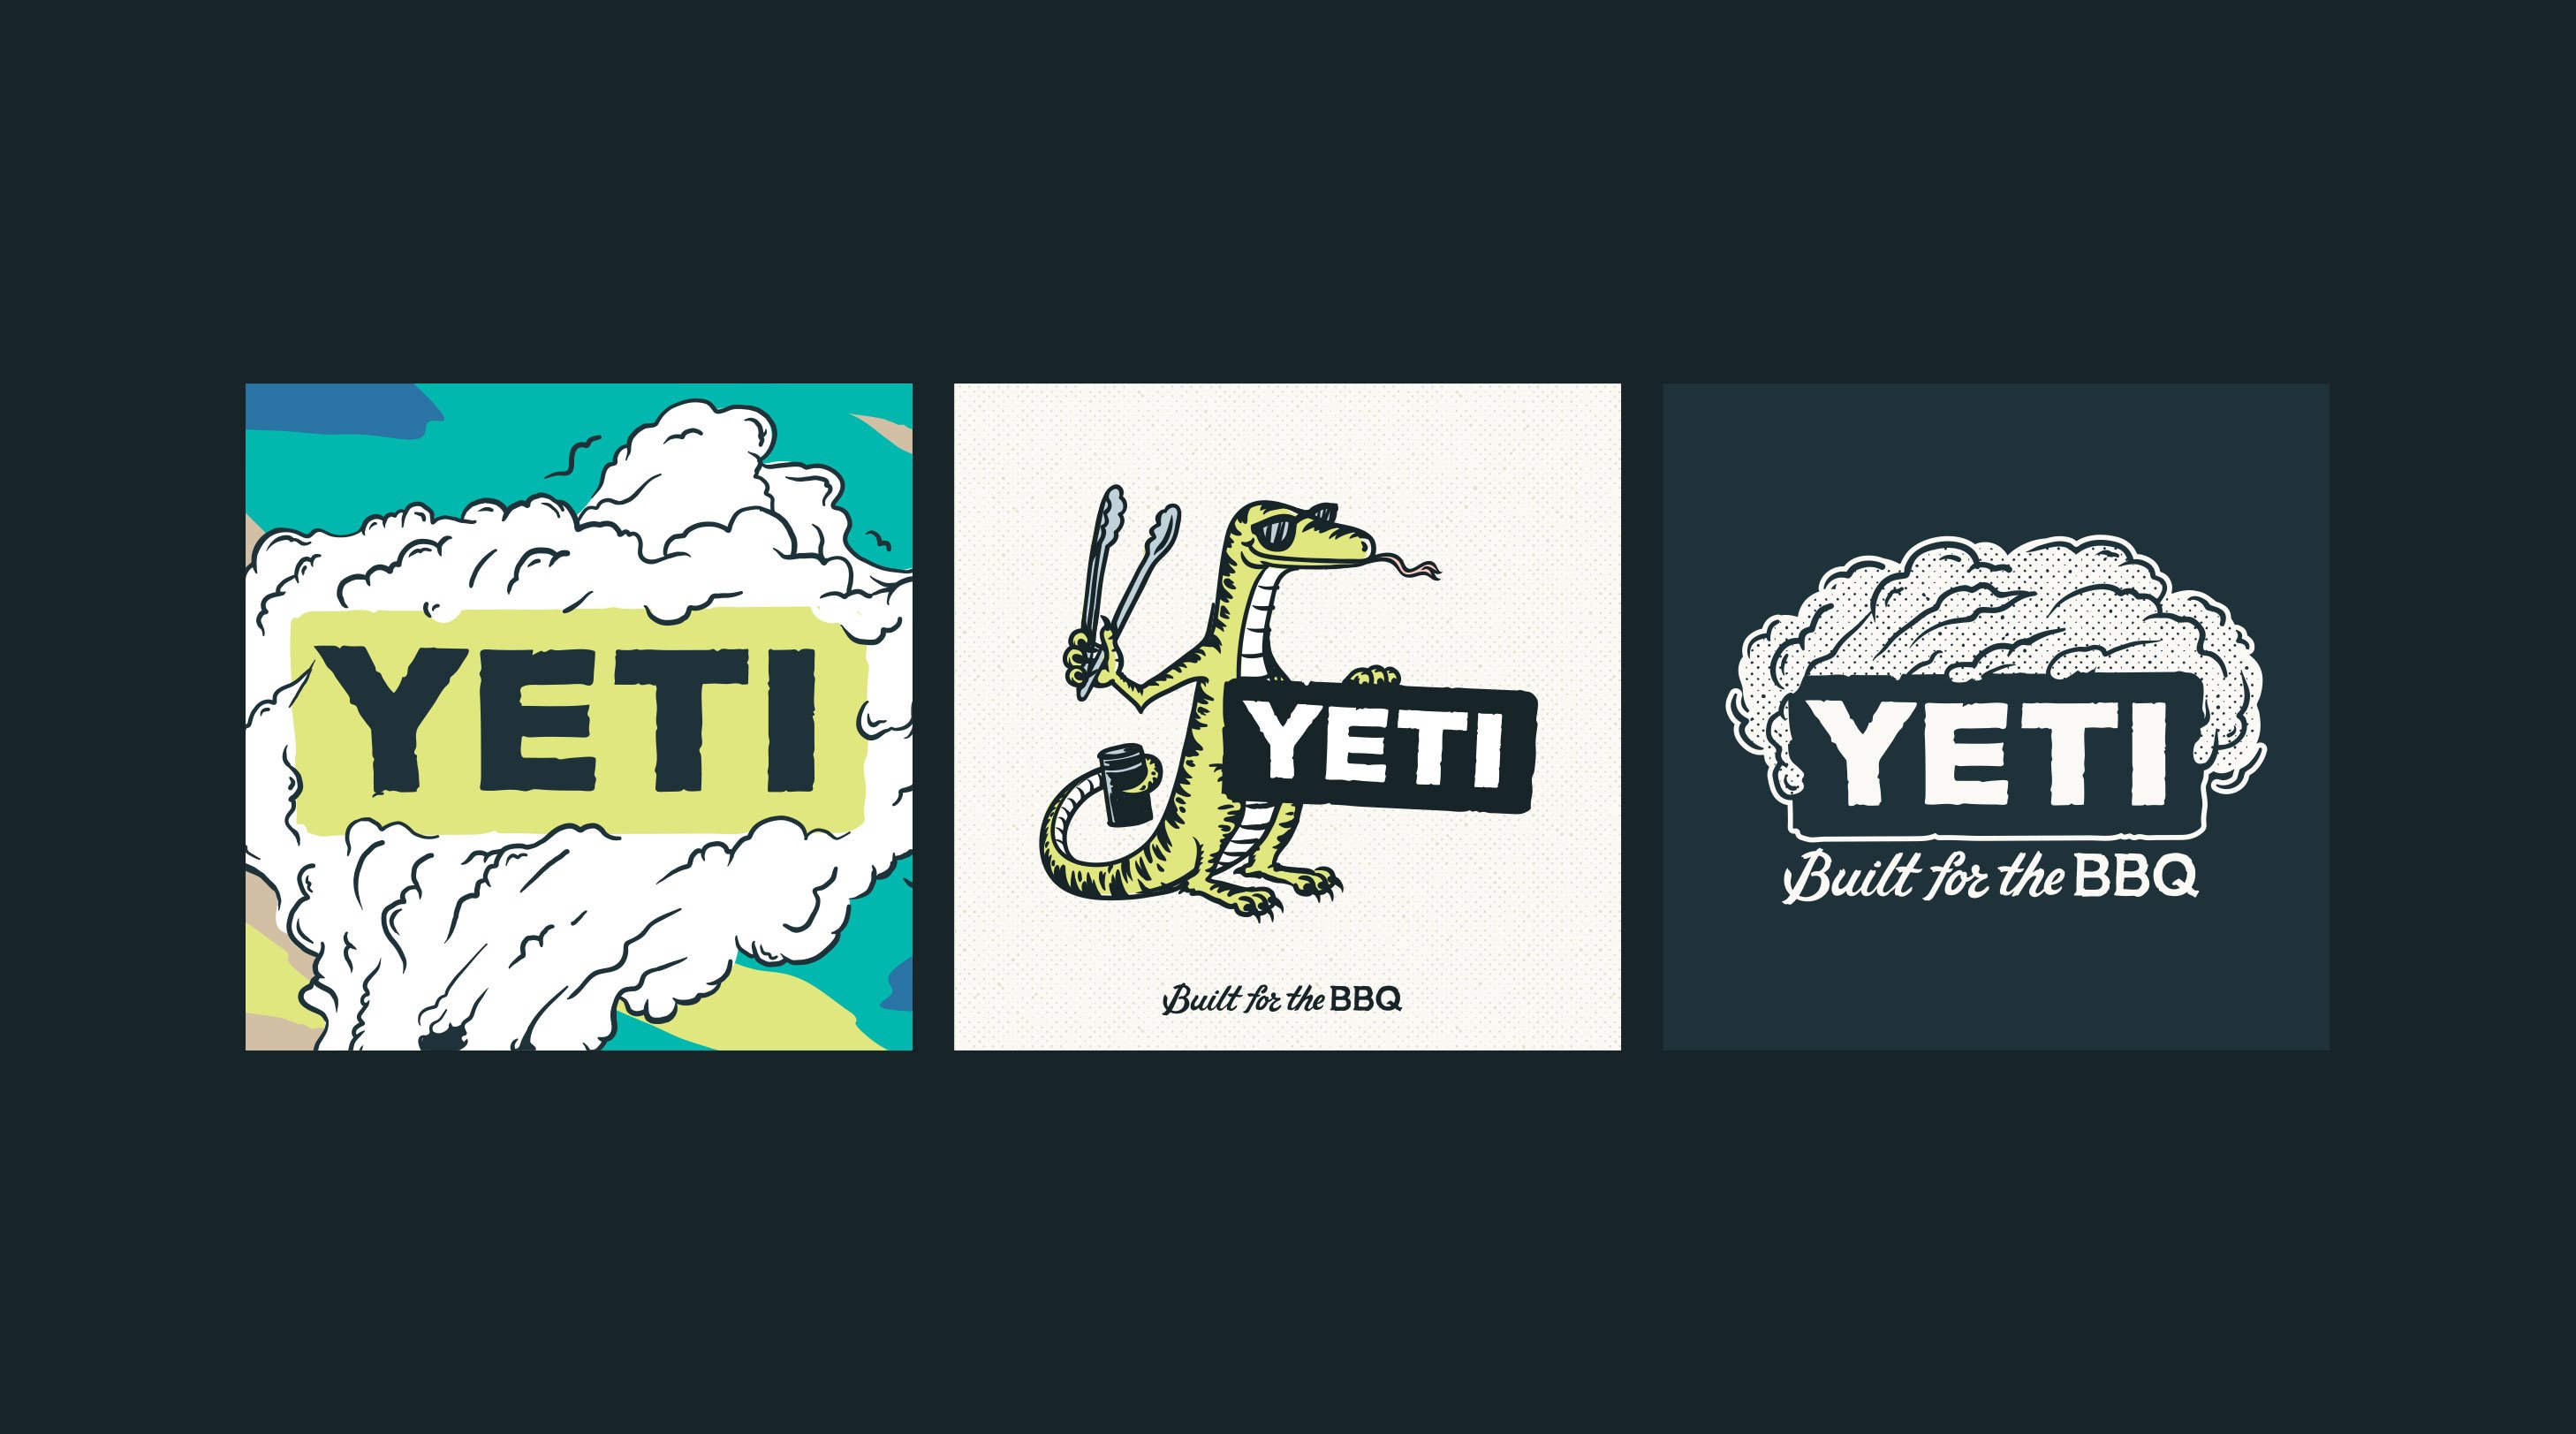 Illustration tiles for the Yeti Esky Campaign